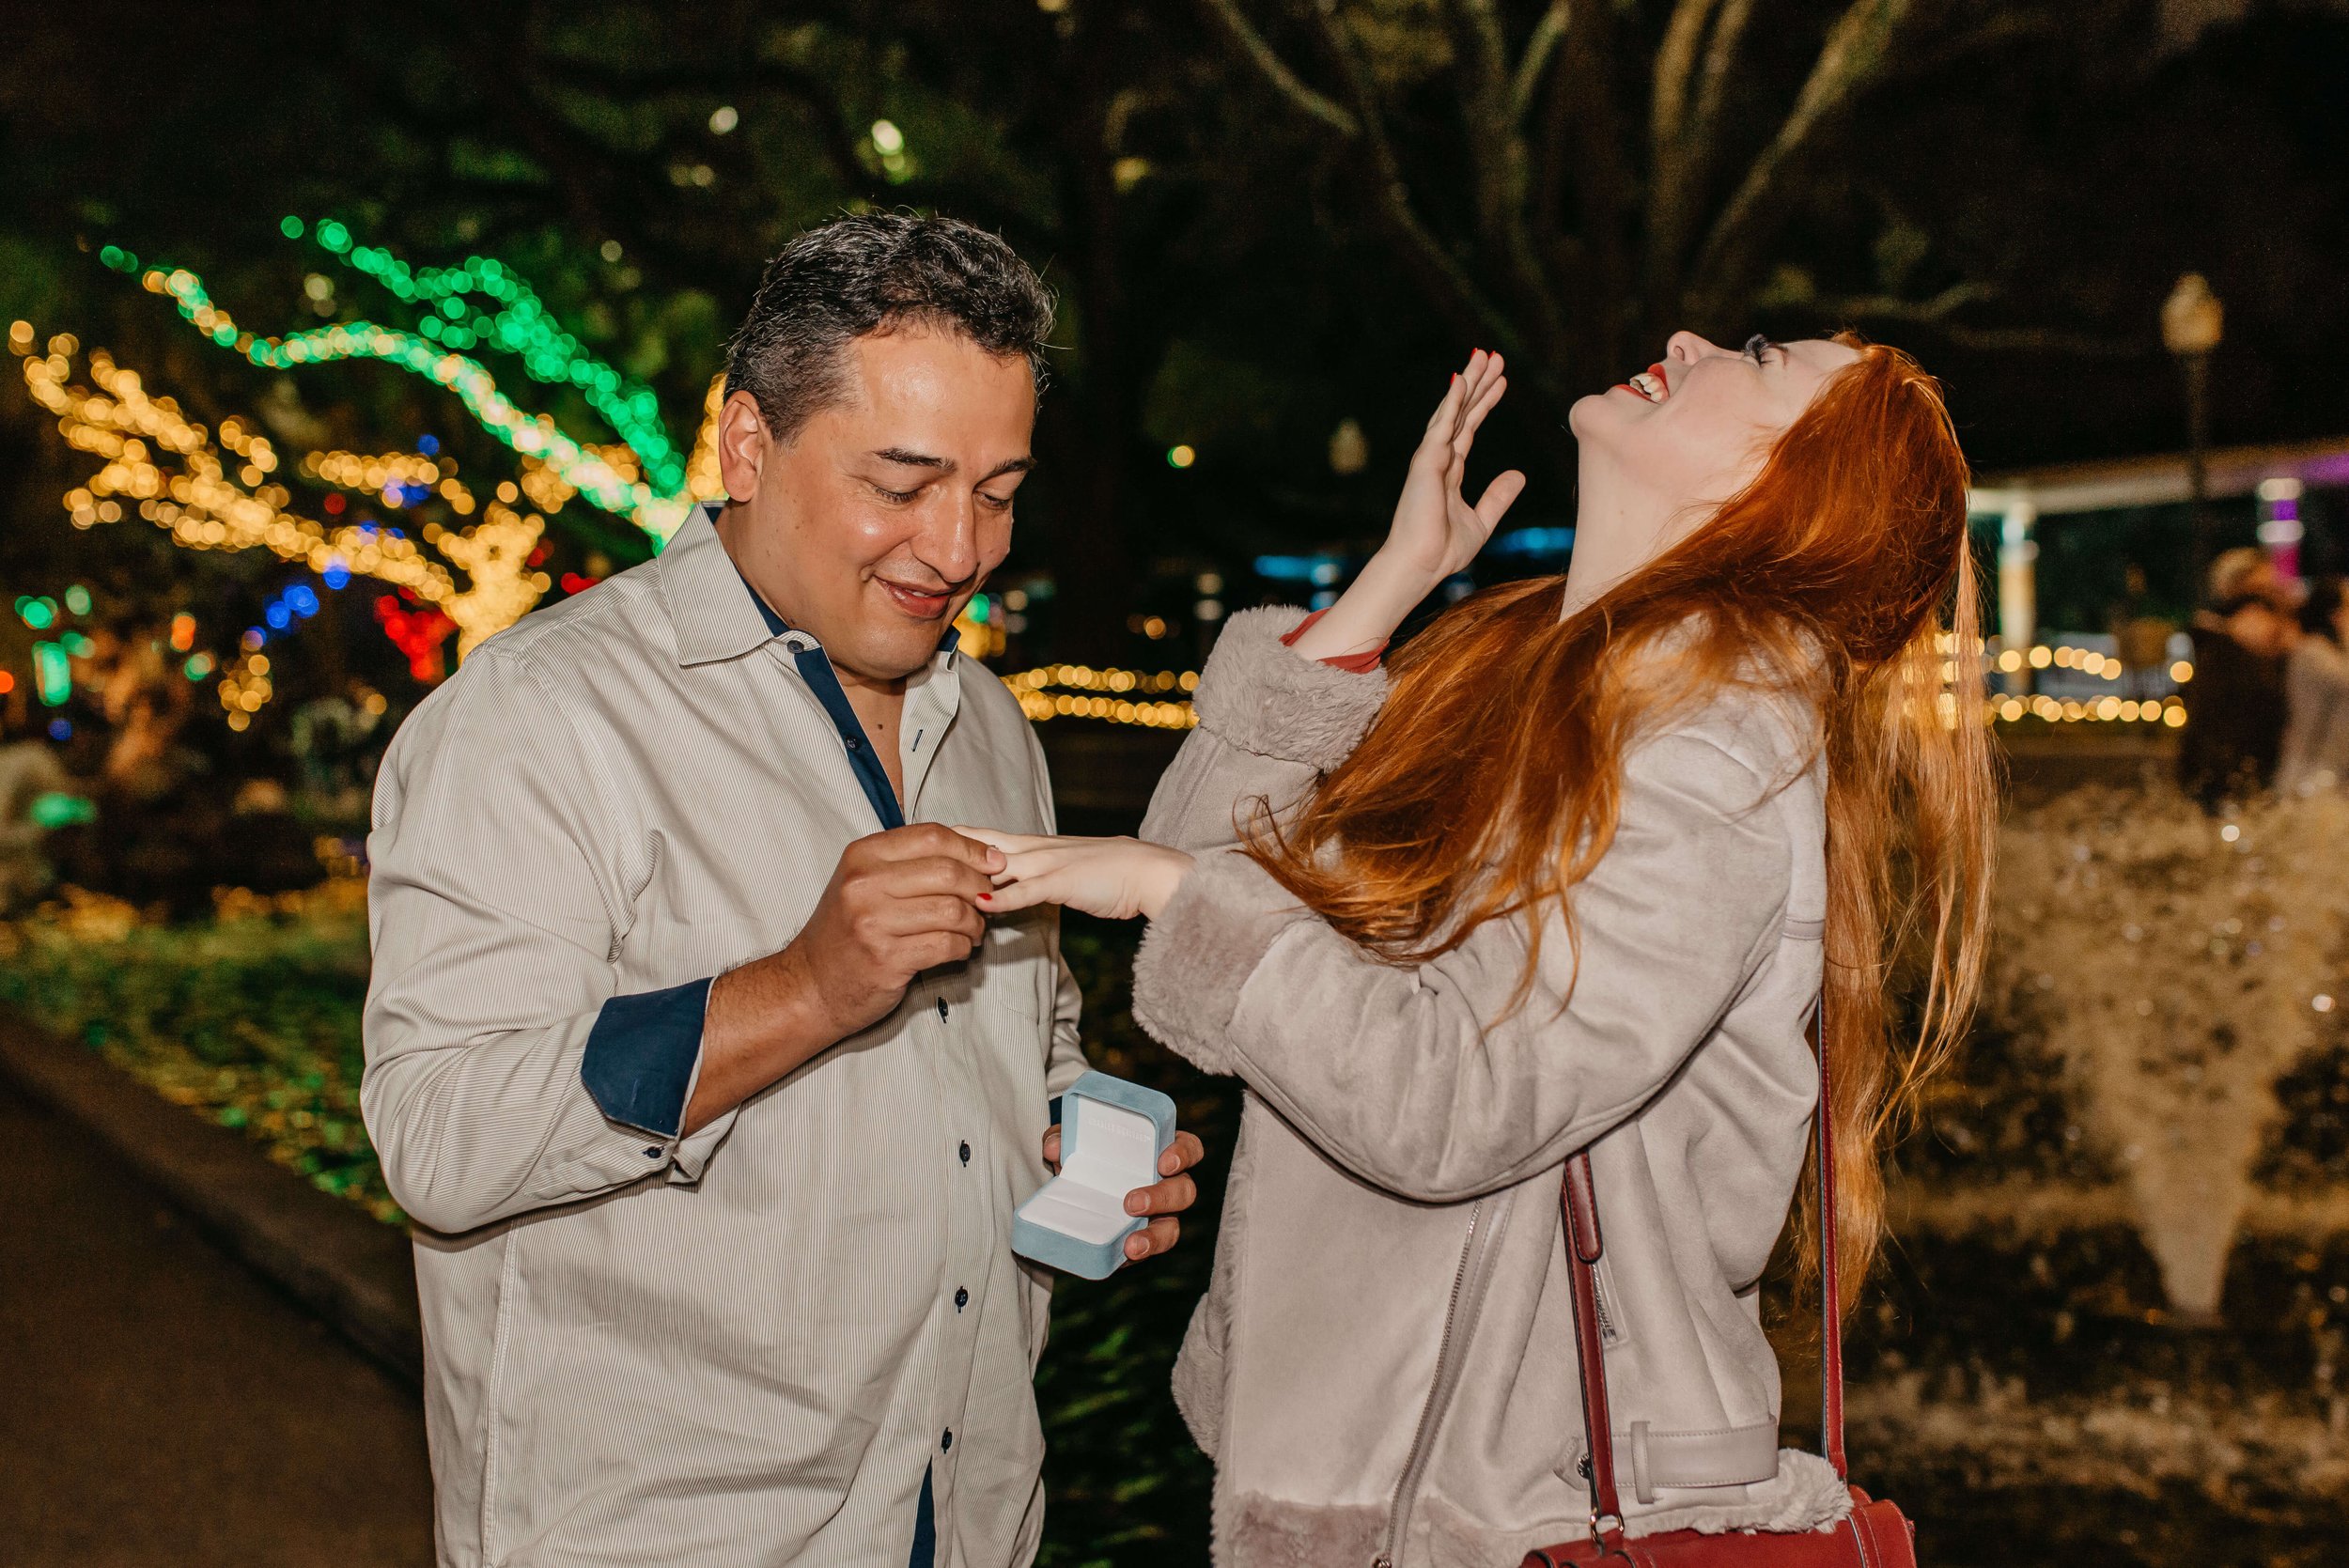 Surprise Proposal Photography in Houston, Texas photographed by J. Andrade Visual Arts